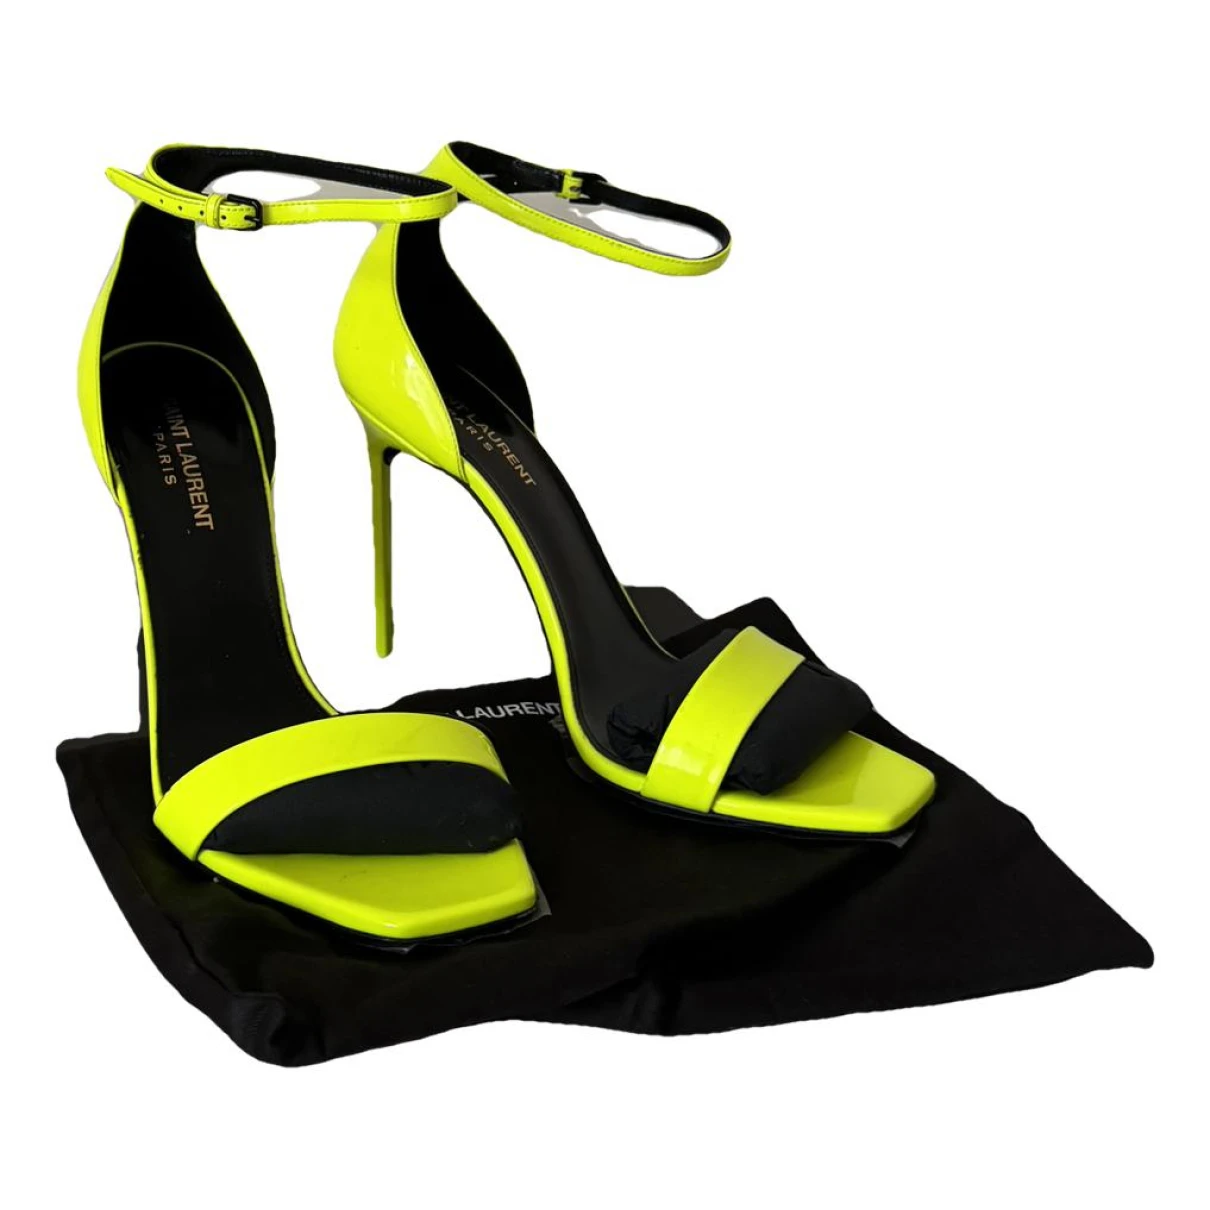 Pre-owned Saint Laurent Patent Leather Sandals In Yellow